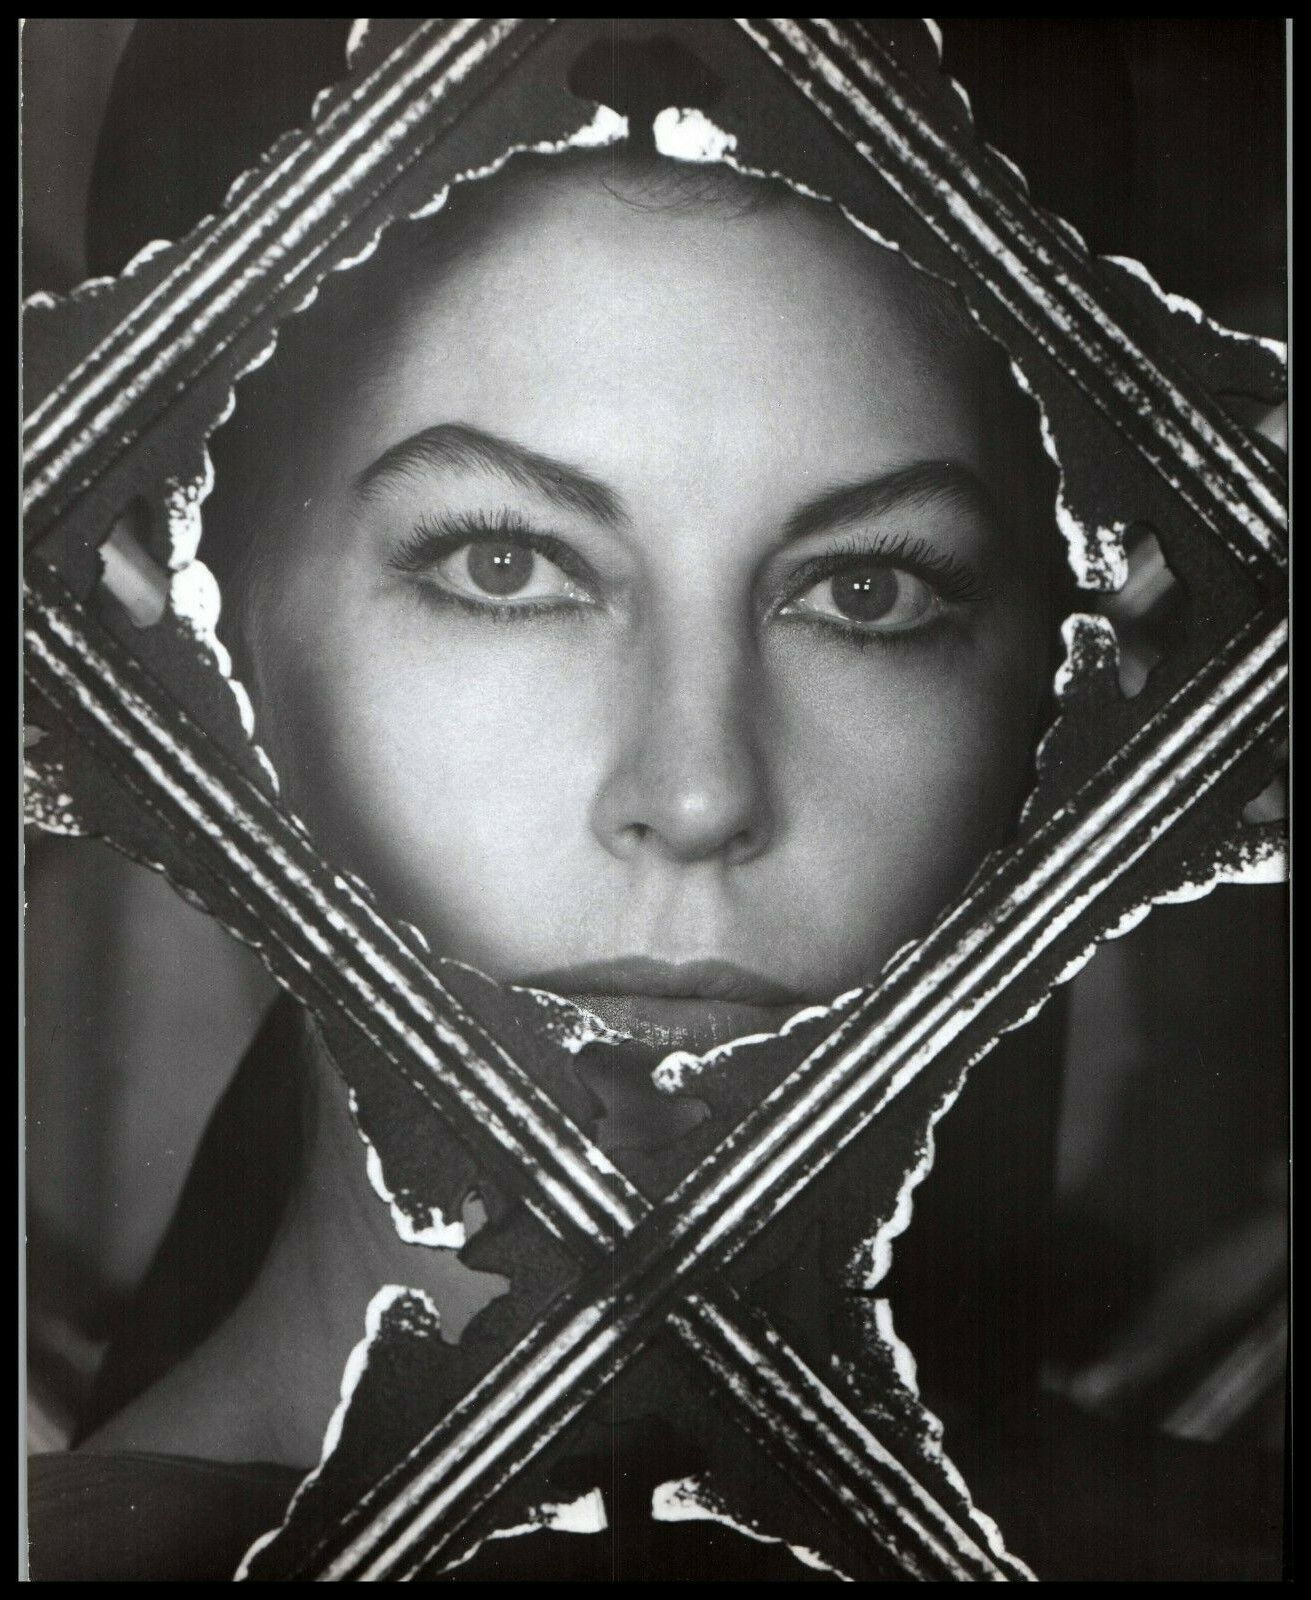 Sultry AWESOME Femme Fatale Ava Gardner CLOSE-UP 1940s DBW ORIG PHOTO 479